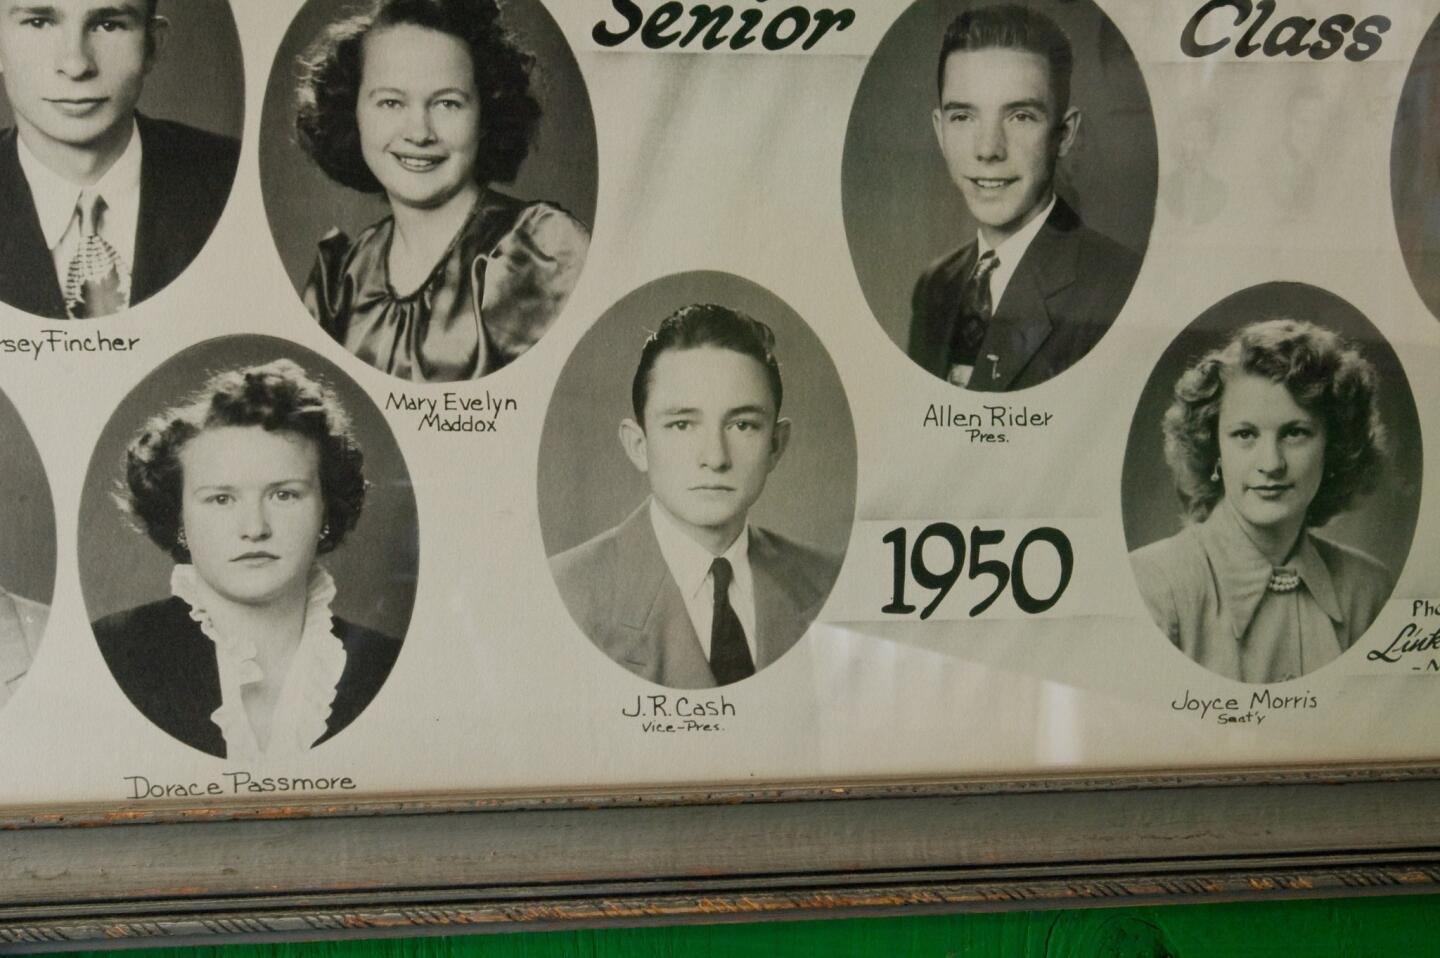 Johnny Cash grew up in Arkansas as J.R. Cash. He worked on the family farm through the Great Depression, joined the Air Force and got married before pursuing a professional career in music. His hobby of singing and songwriting became a job in 1955, when he signed with Sun Records. Above, Cash is pictured, center, in his senior high school photo.